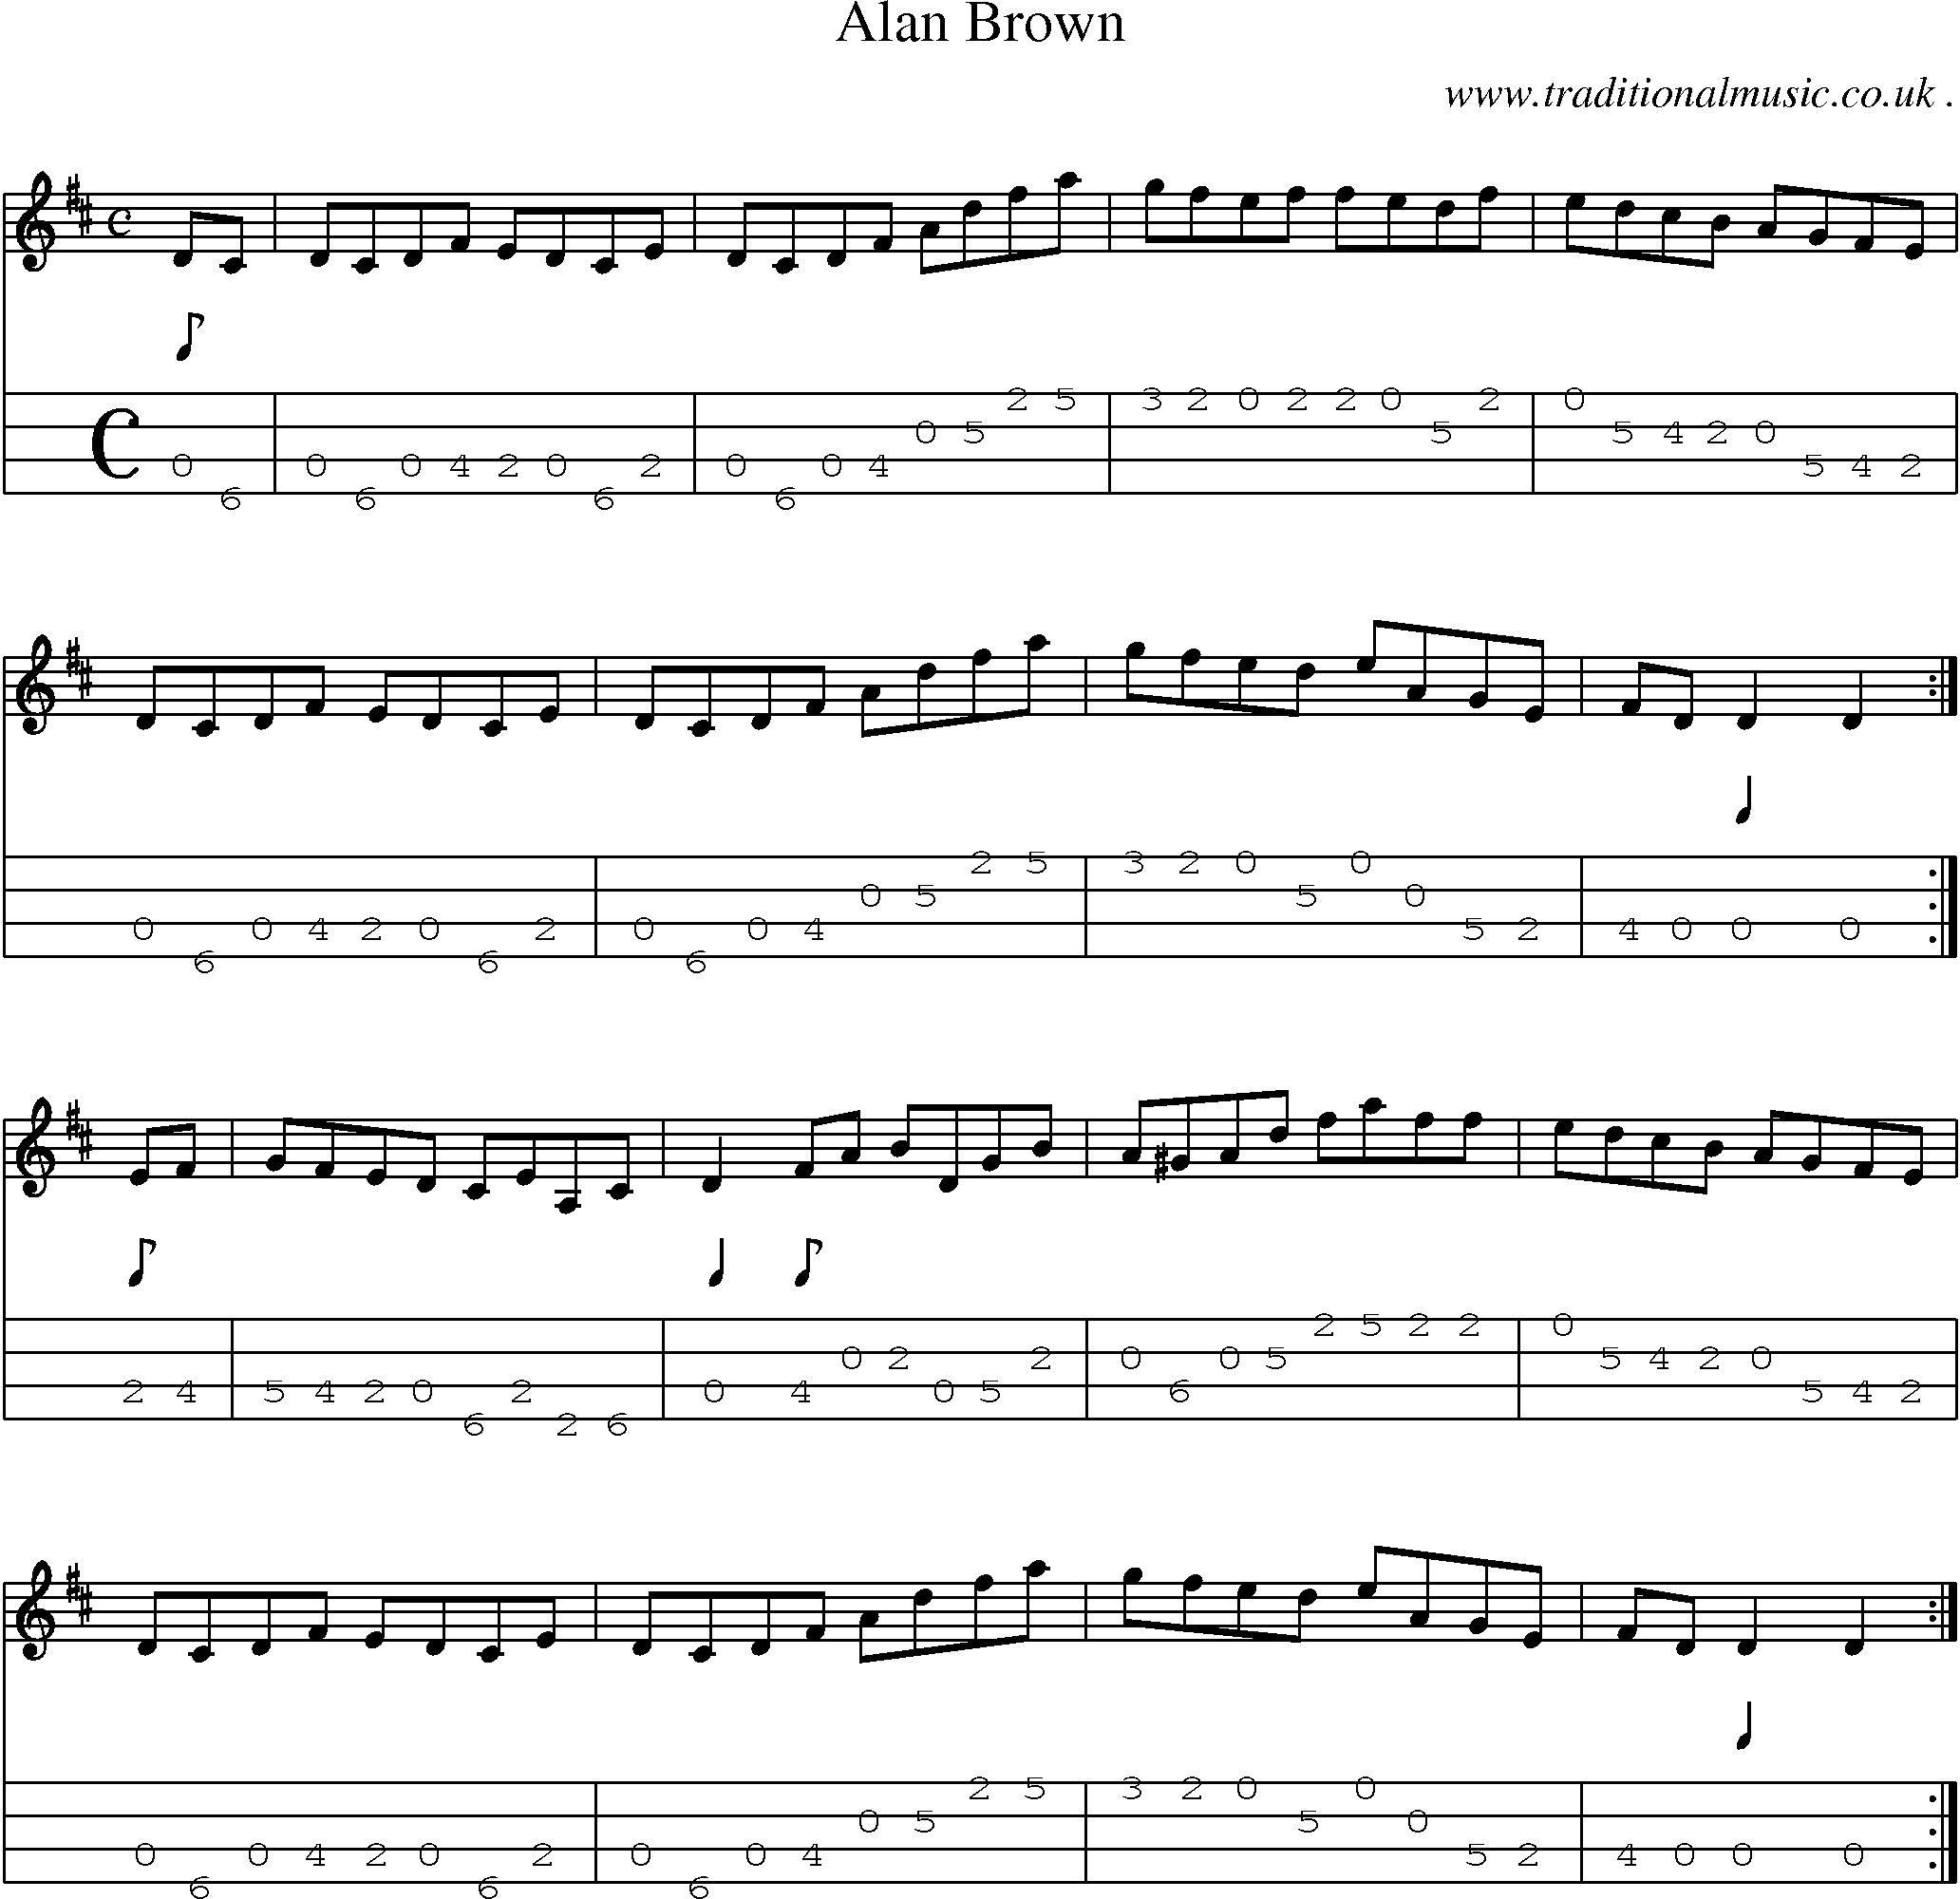 Sheet-music  score, Chords and Mandolin Tabs for Alan Brown